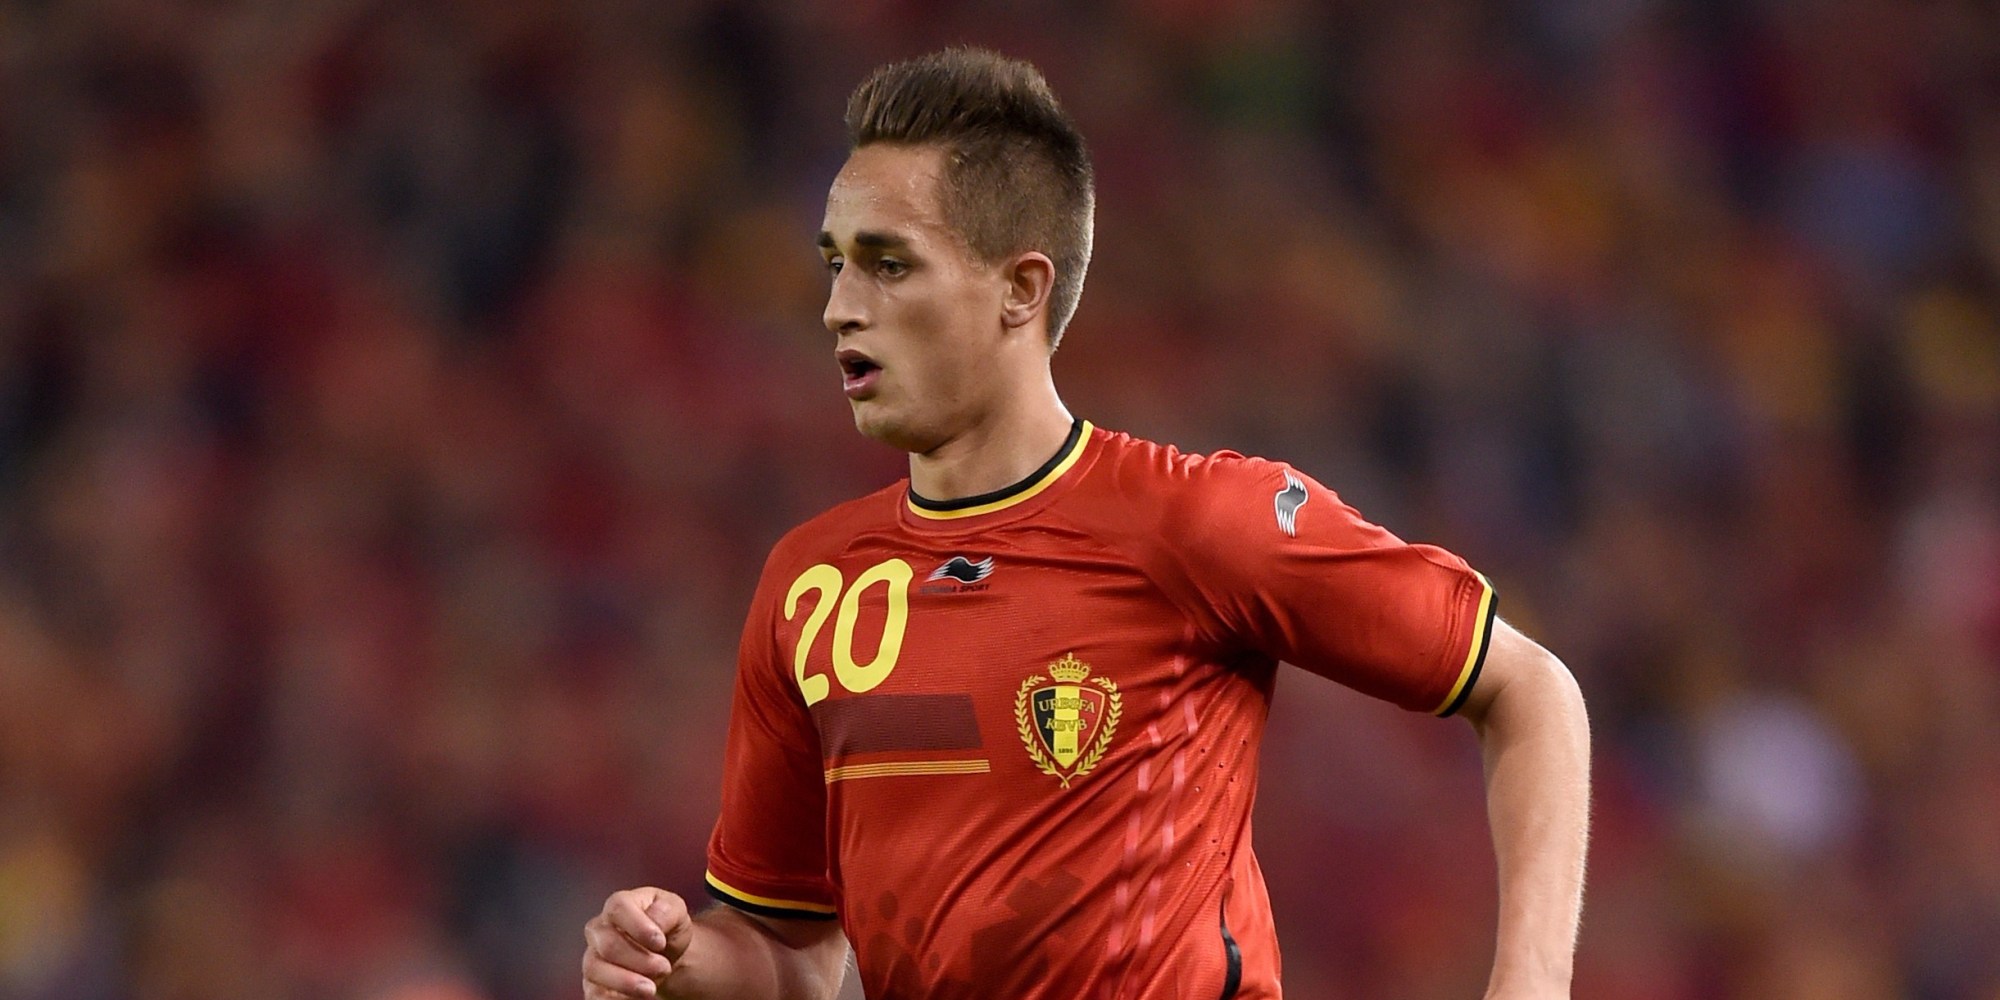 Belgium's forward Adnan Januzaj moves the ball during the friendly football match between Belgium and Luxembourg at the Fenix Stadium, on May 26, 2014 in Genk. AFP PHOTO / JOHN THYS (Photo credit should read JOHN THYS/AFP/Getty Images)